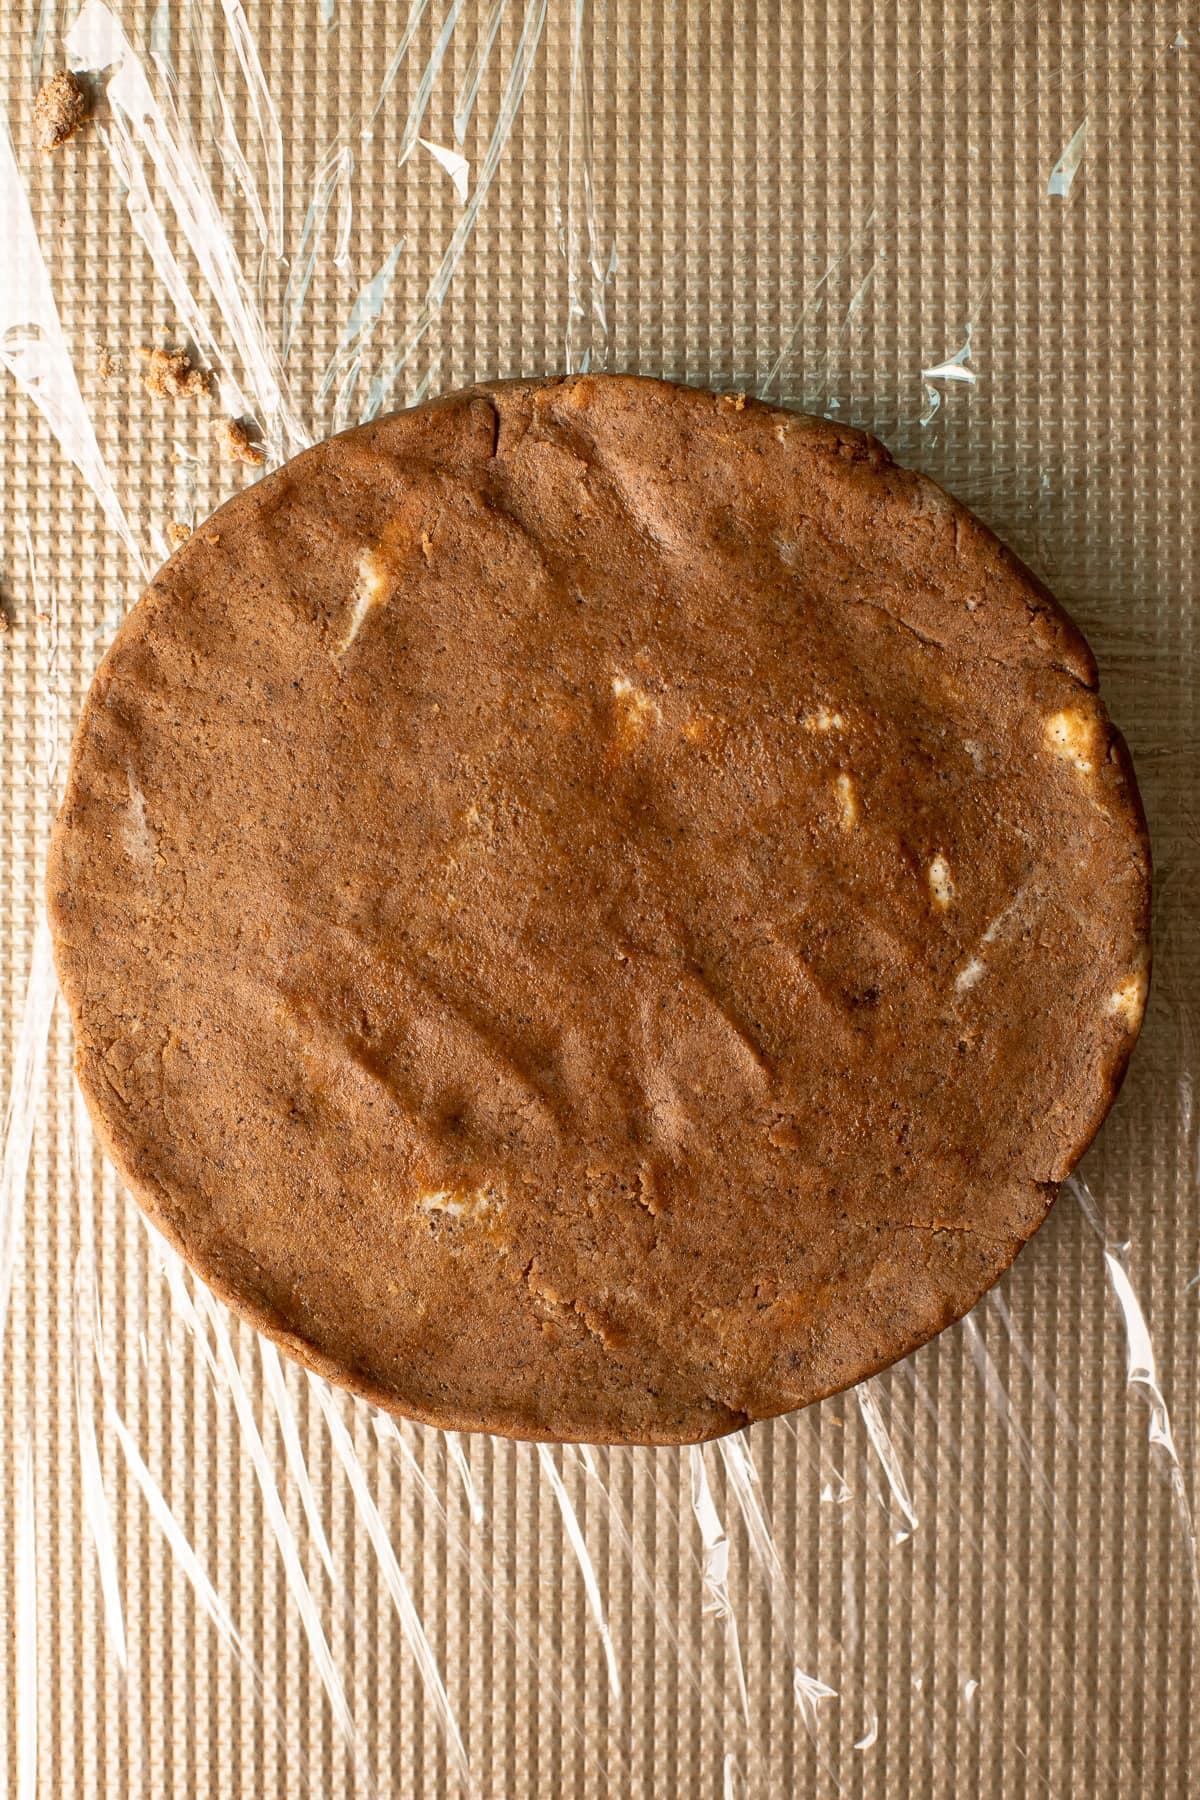 Coffee scone dough shaped into a disc on a baking sheet.